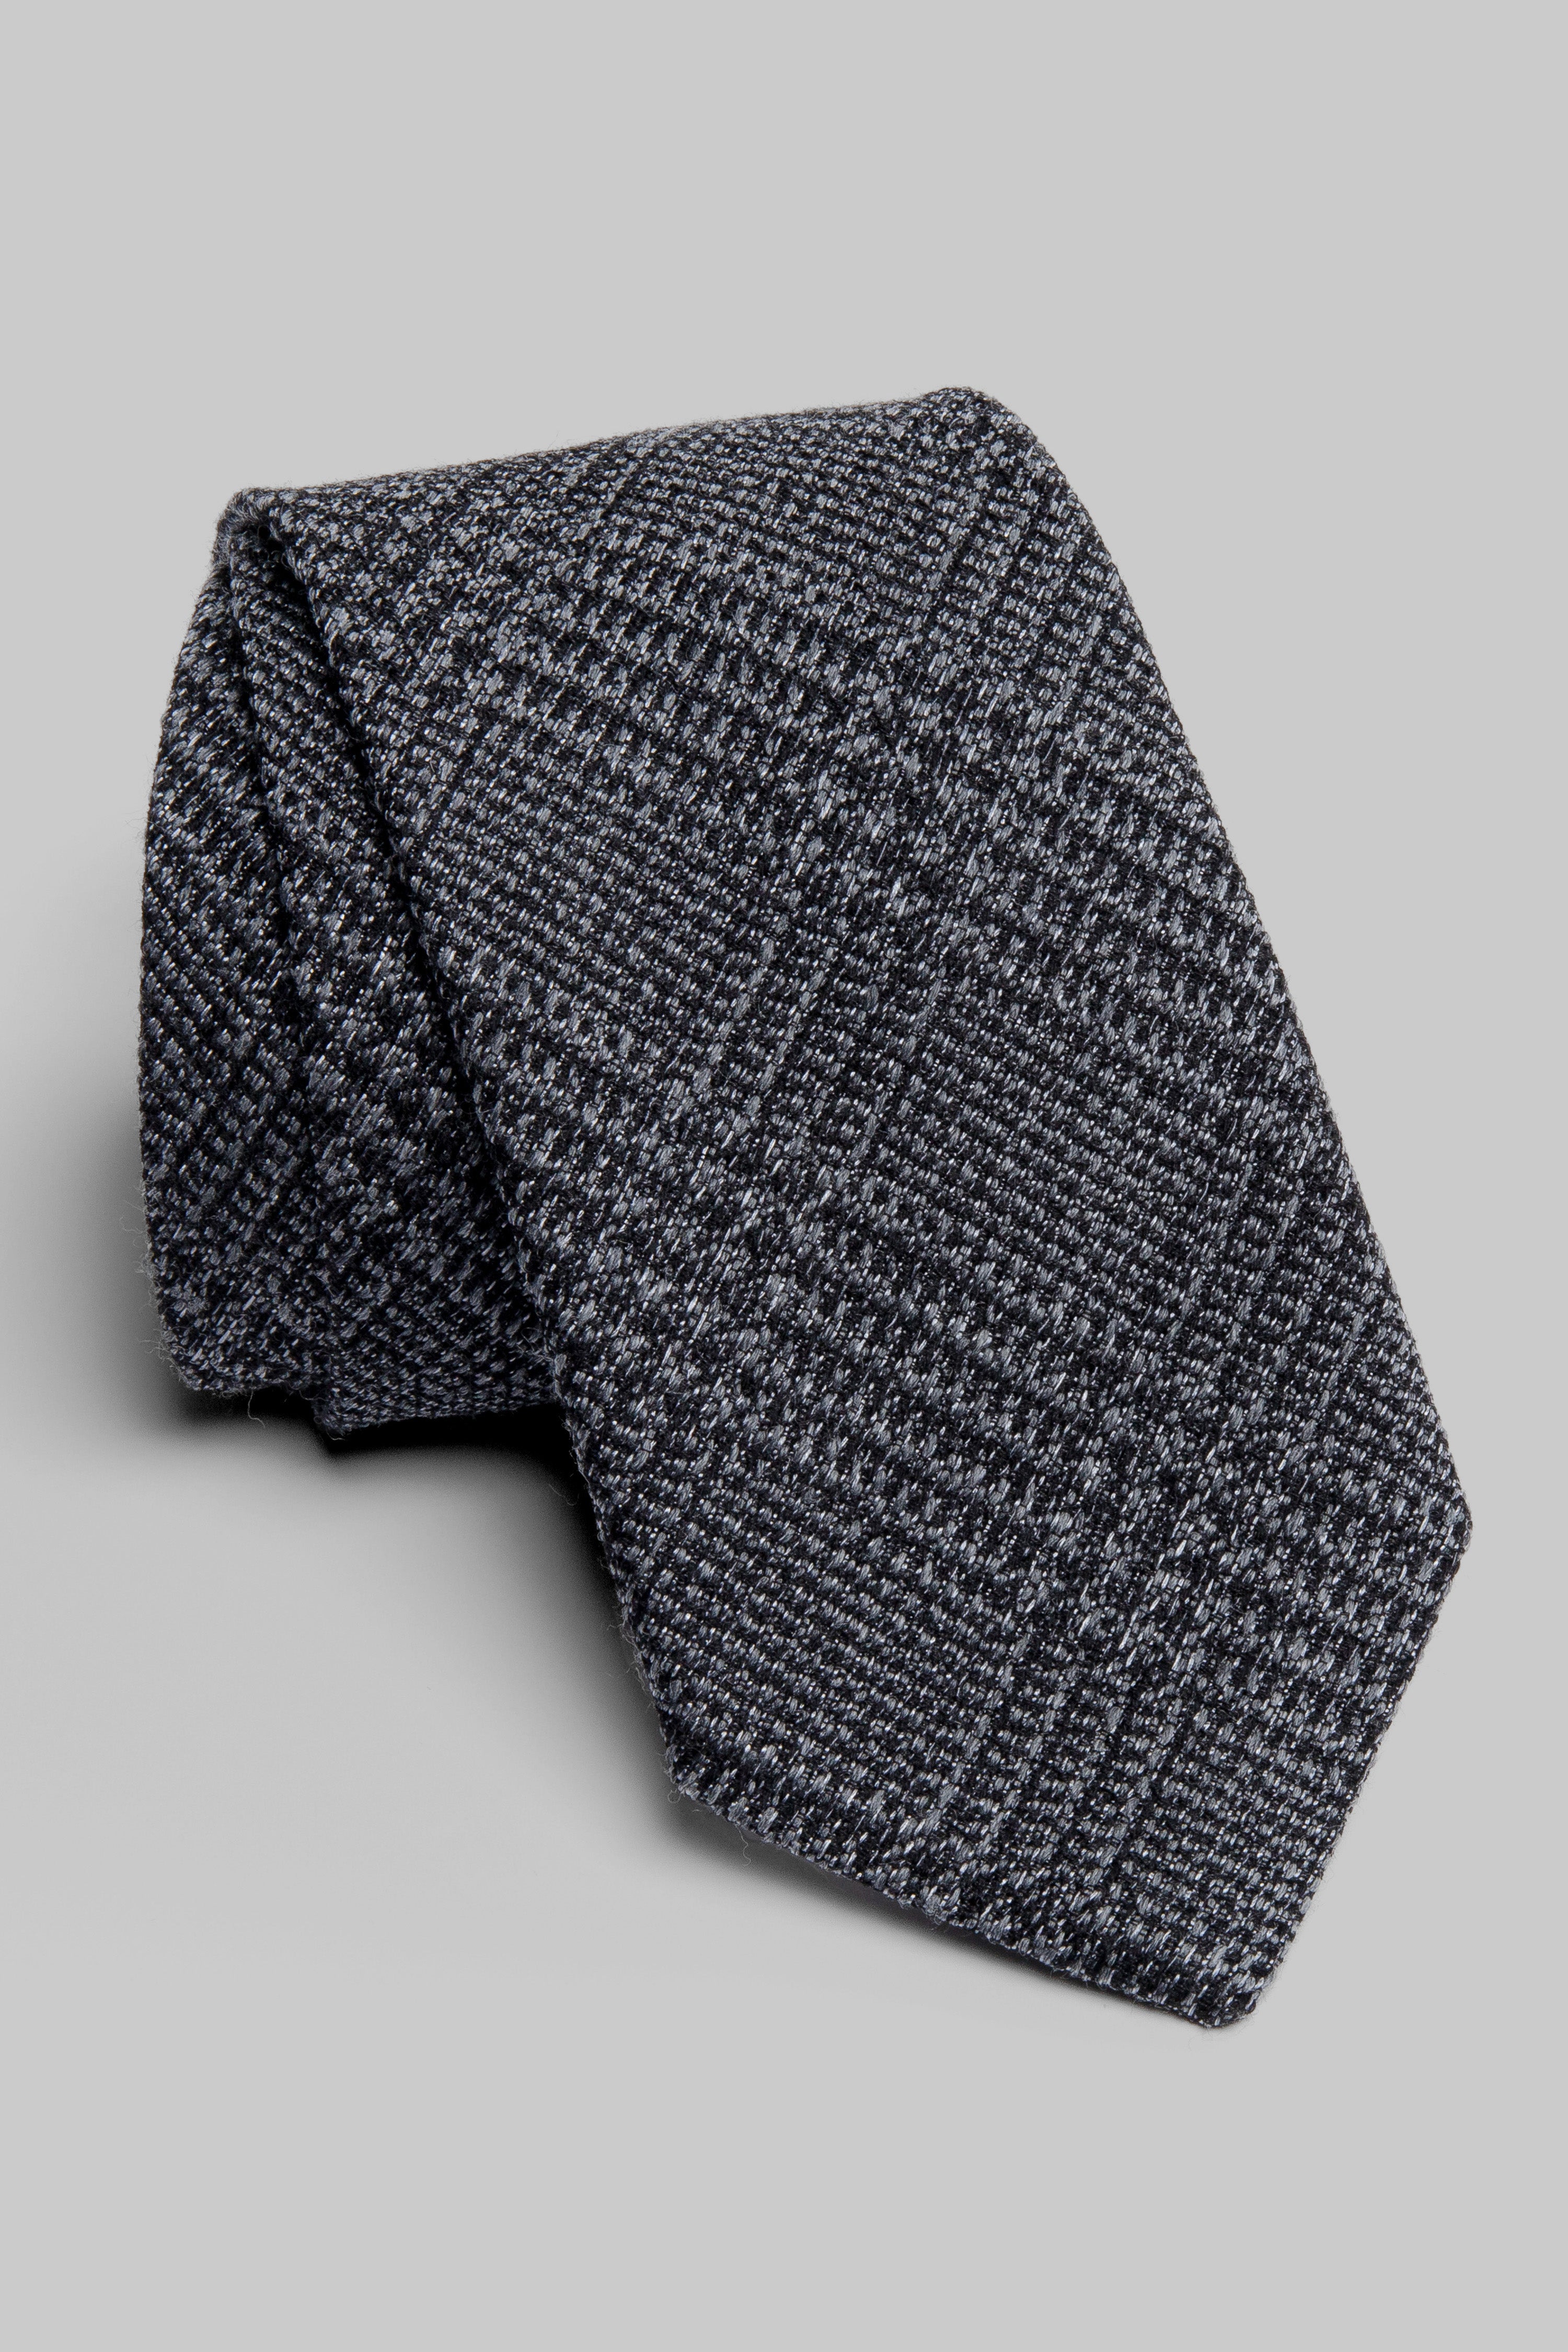 Alt view 1 Glen Plaid Woven Tie in Charcoal